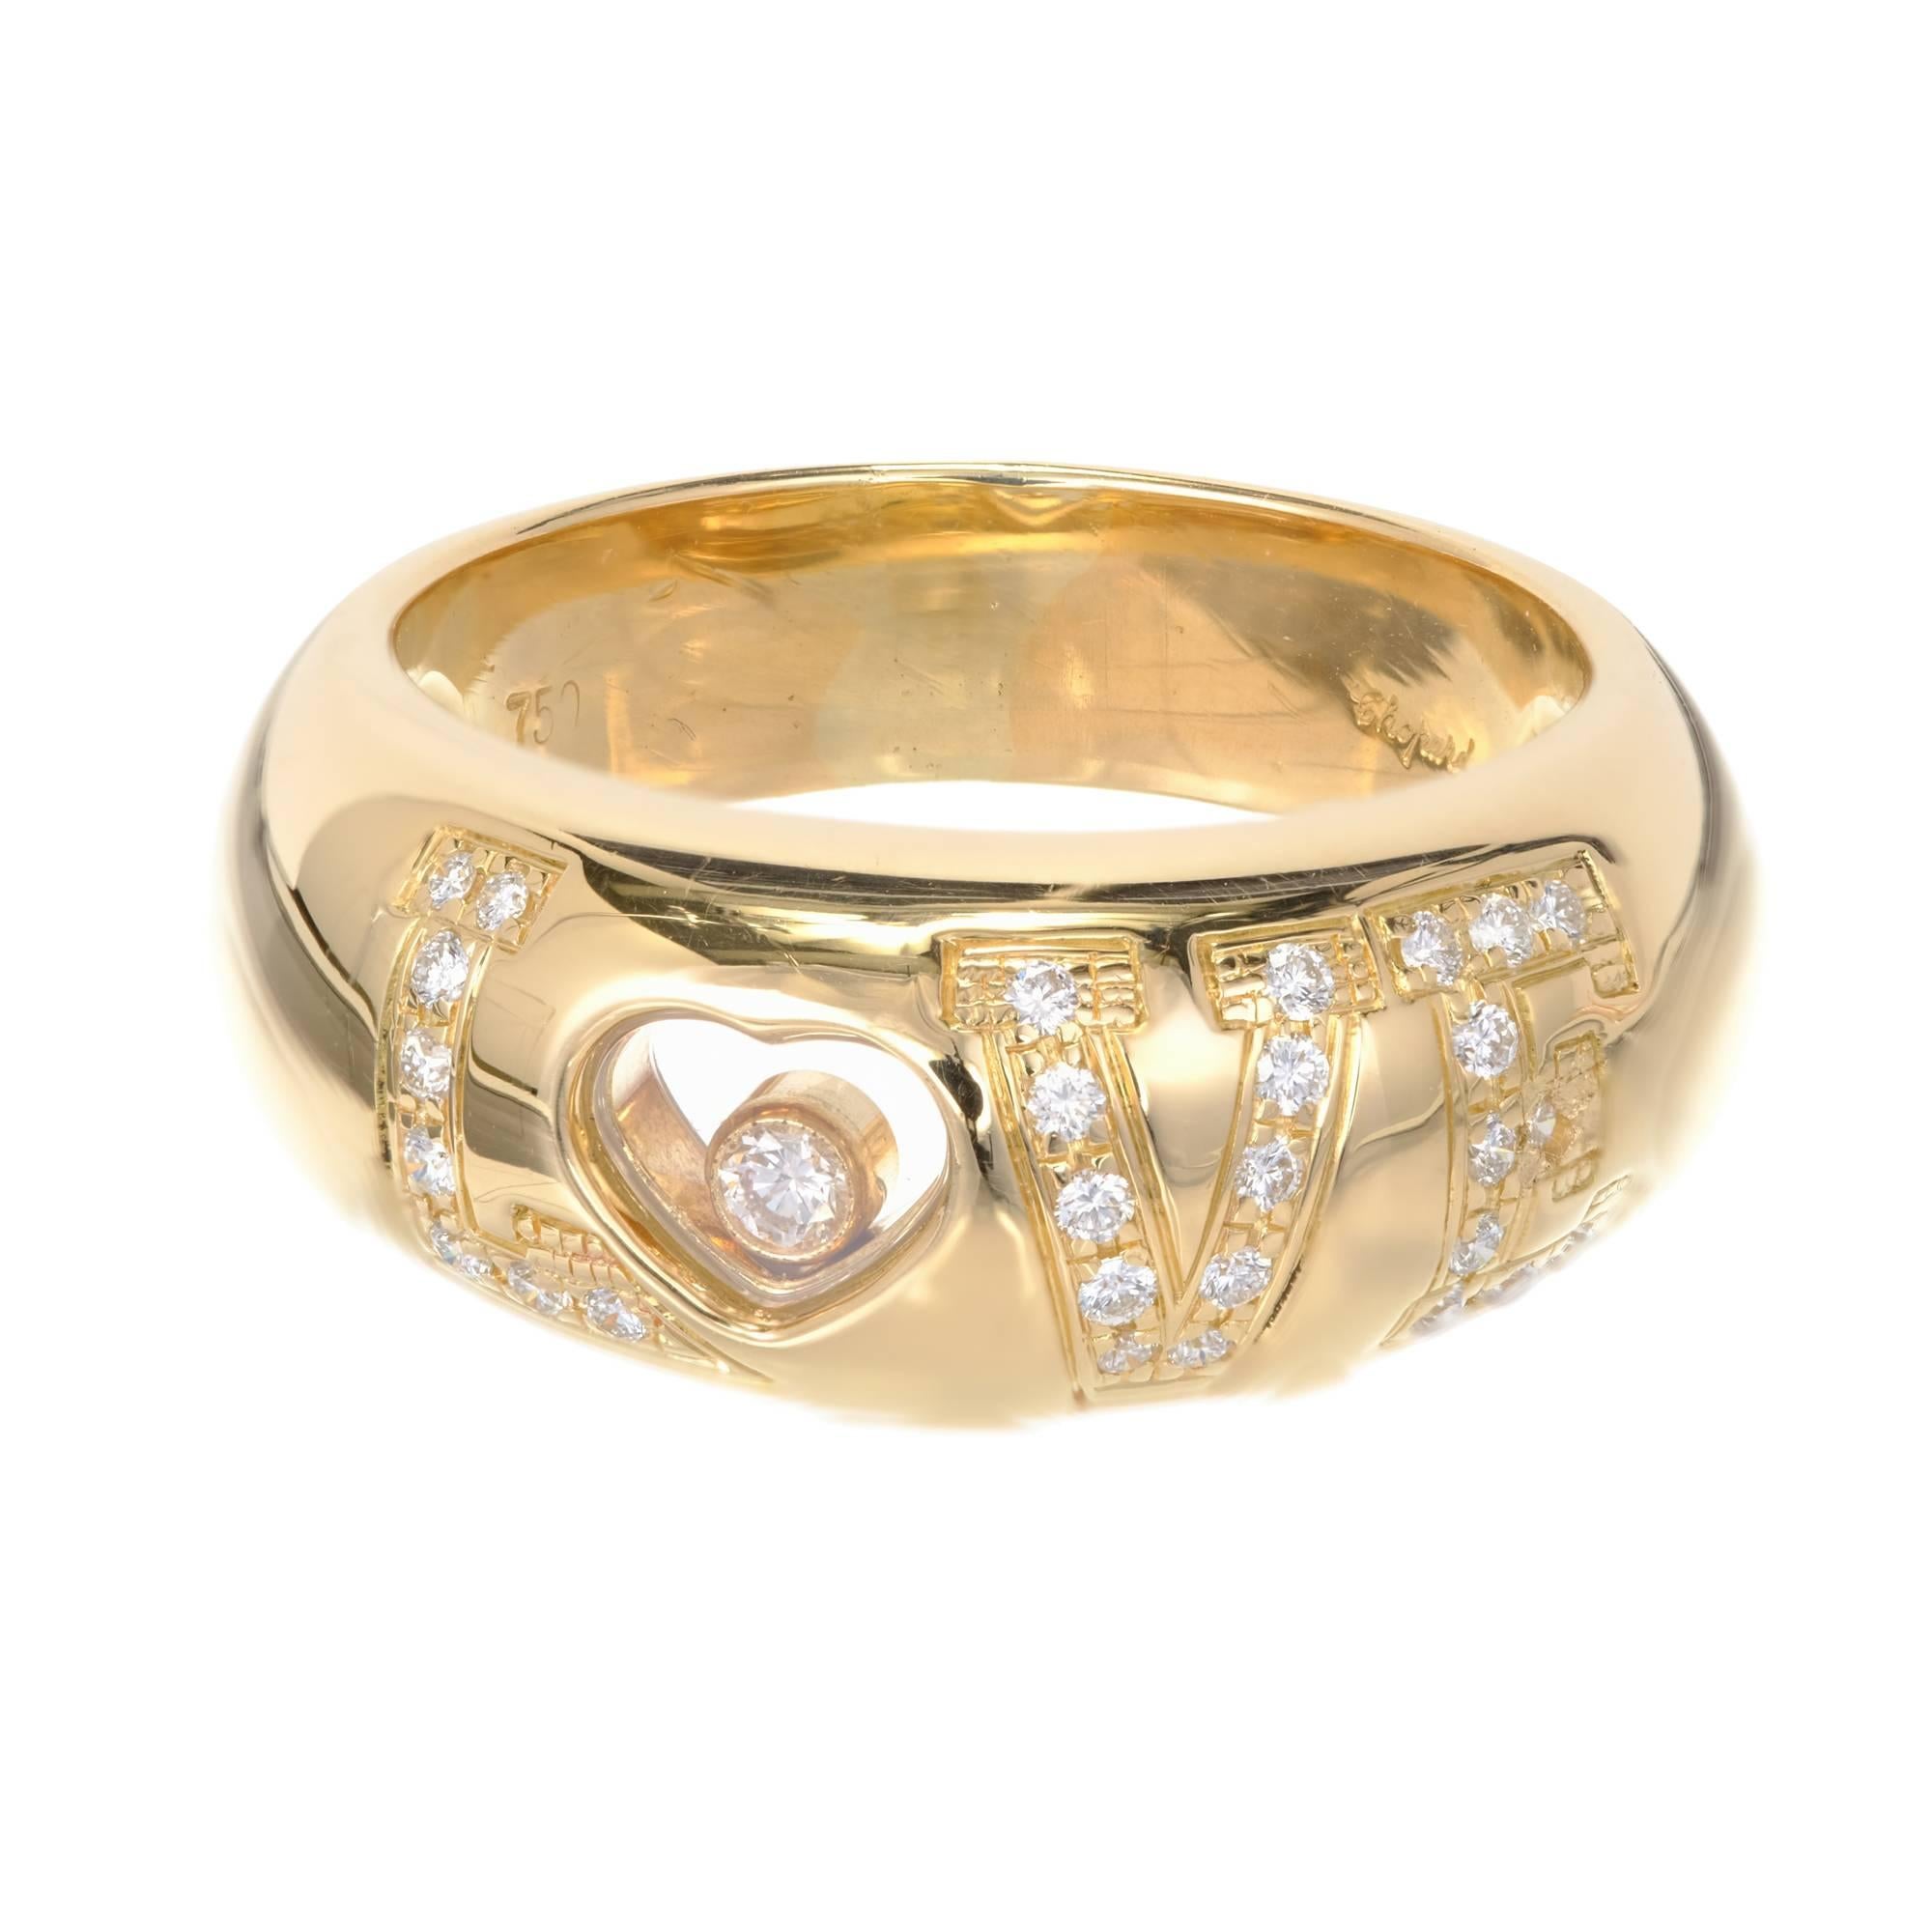 Chopard Happy Diamond 18k yellow gold Love ring.

24 full cut Diamonds, approx. total weight .38cts, F, VVS
Size 7.75 and sizable
18k yellow gold
Tested: 18k
Stamped: 750
Hallmark: Chopard
9.8 grams
Width at top: 8.6mm
Height at top: 6mm
Width at